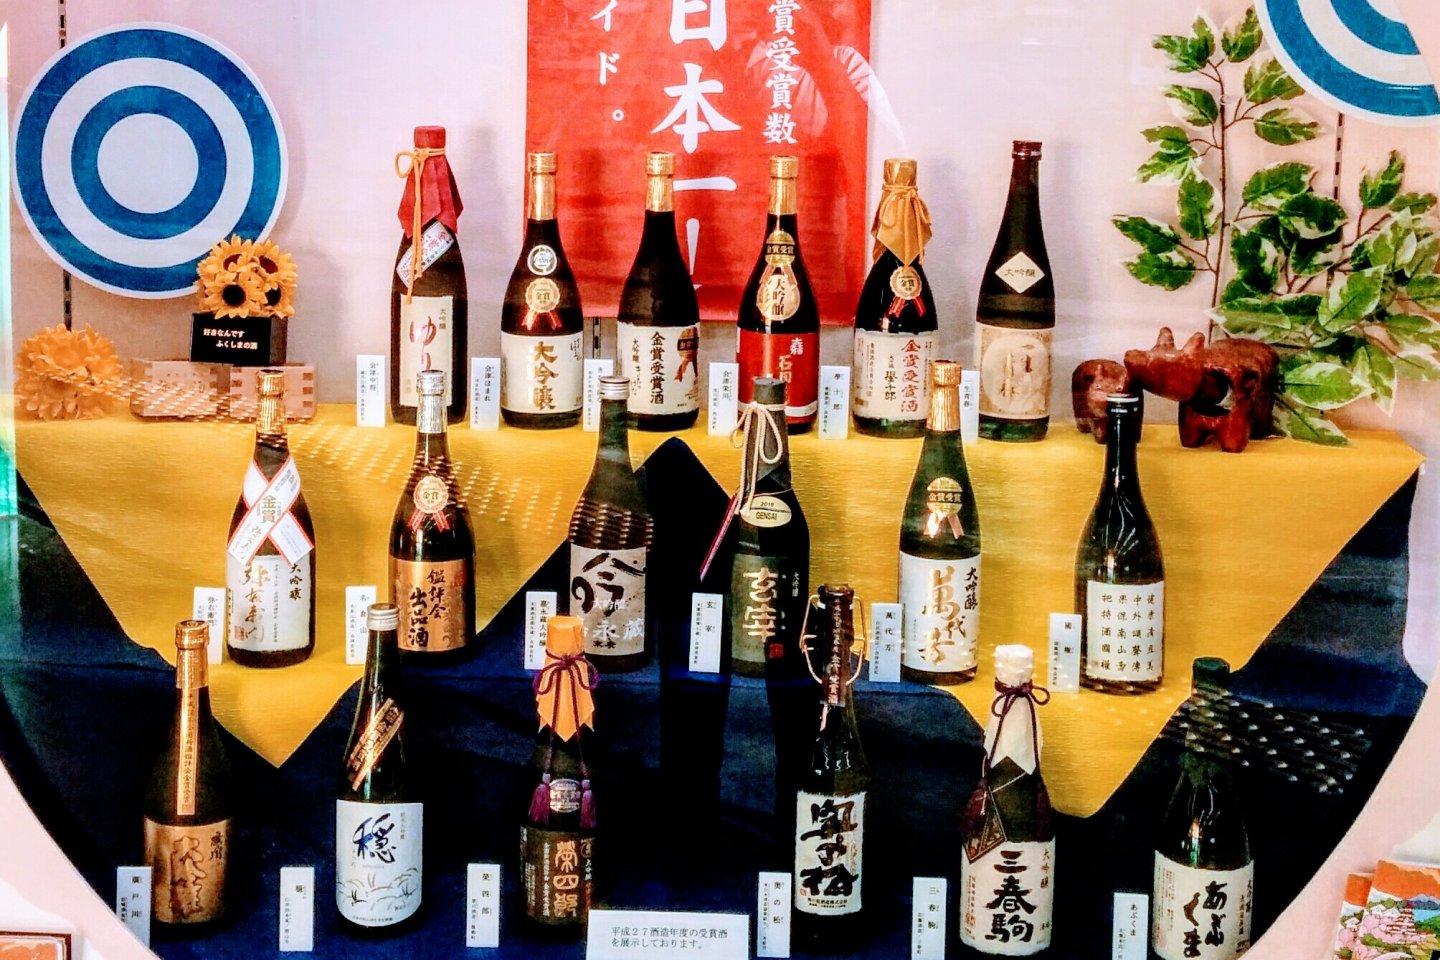 Discover why these sake are champions with a 3 set sake flight